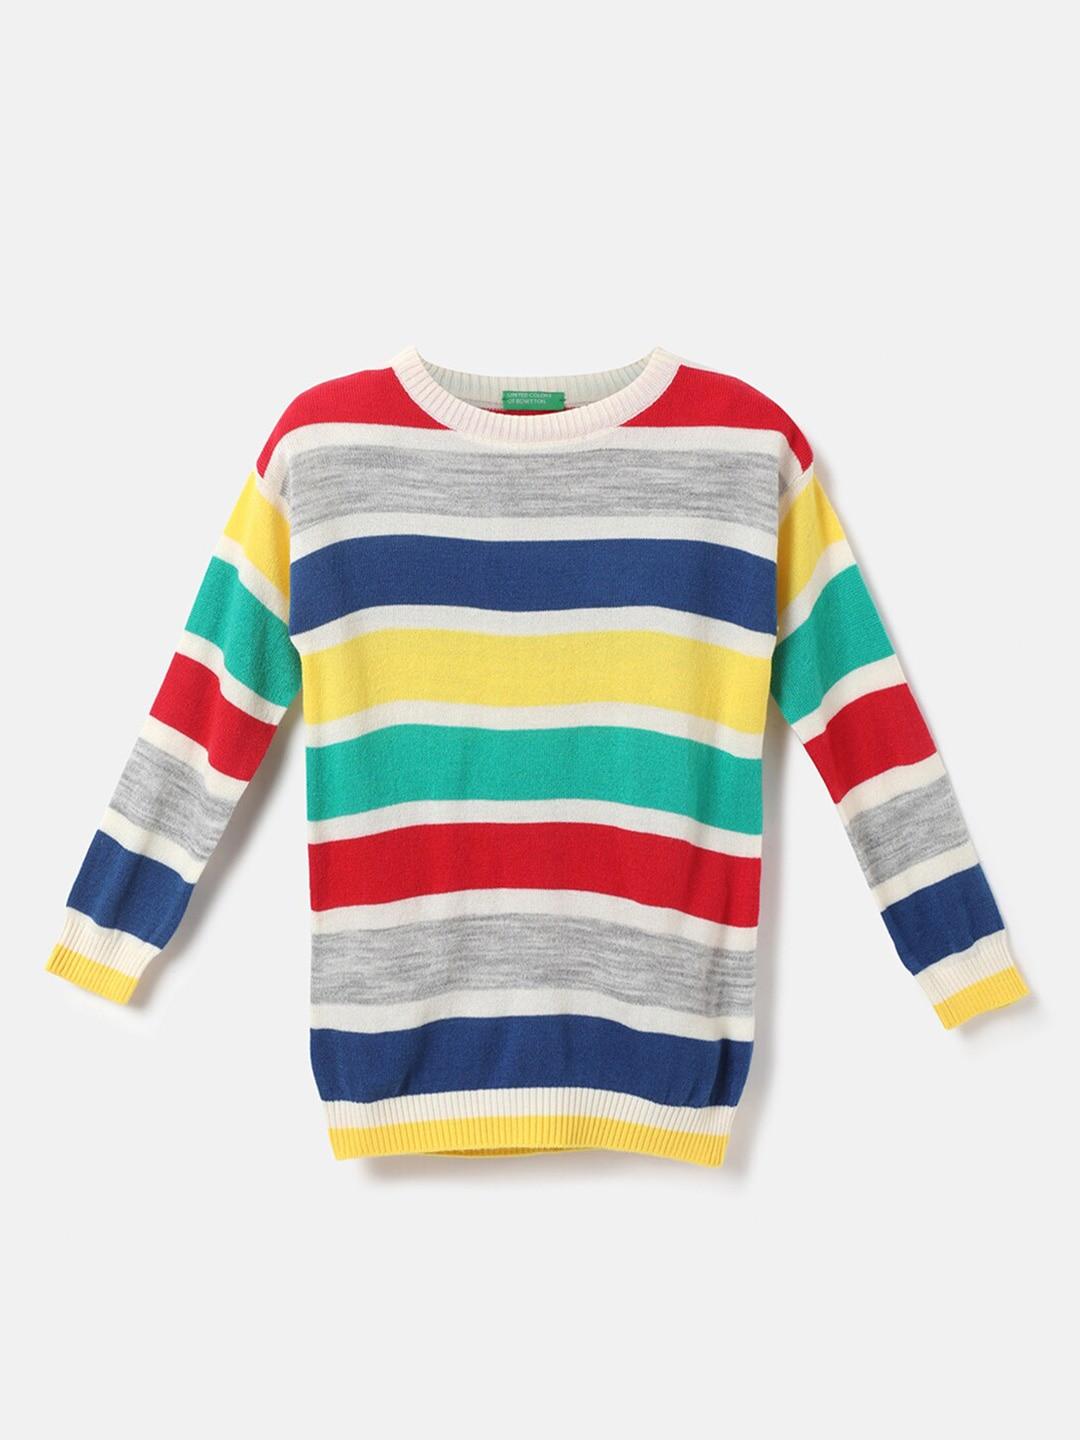 United Colors of Benetton Boys Red & Blue Striped Pullover